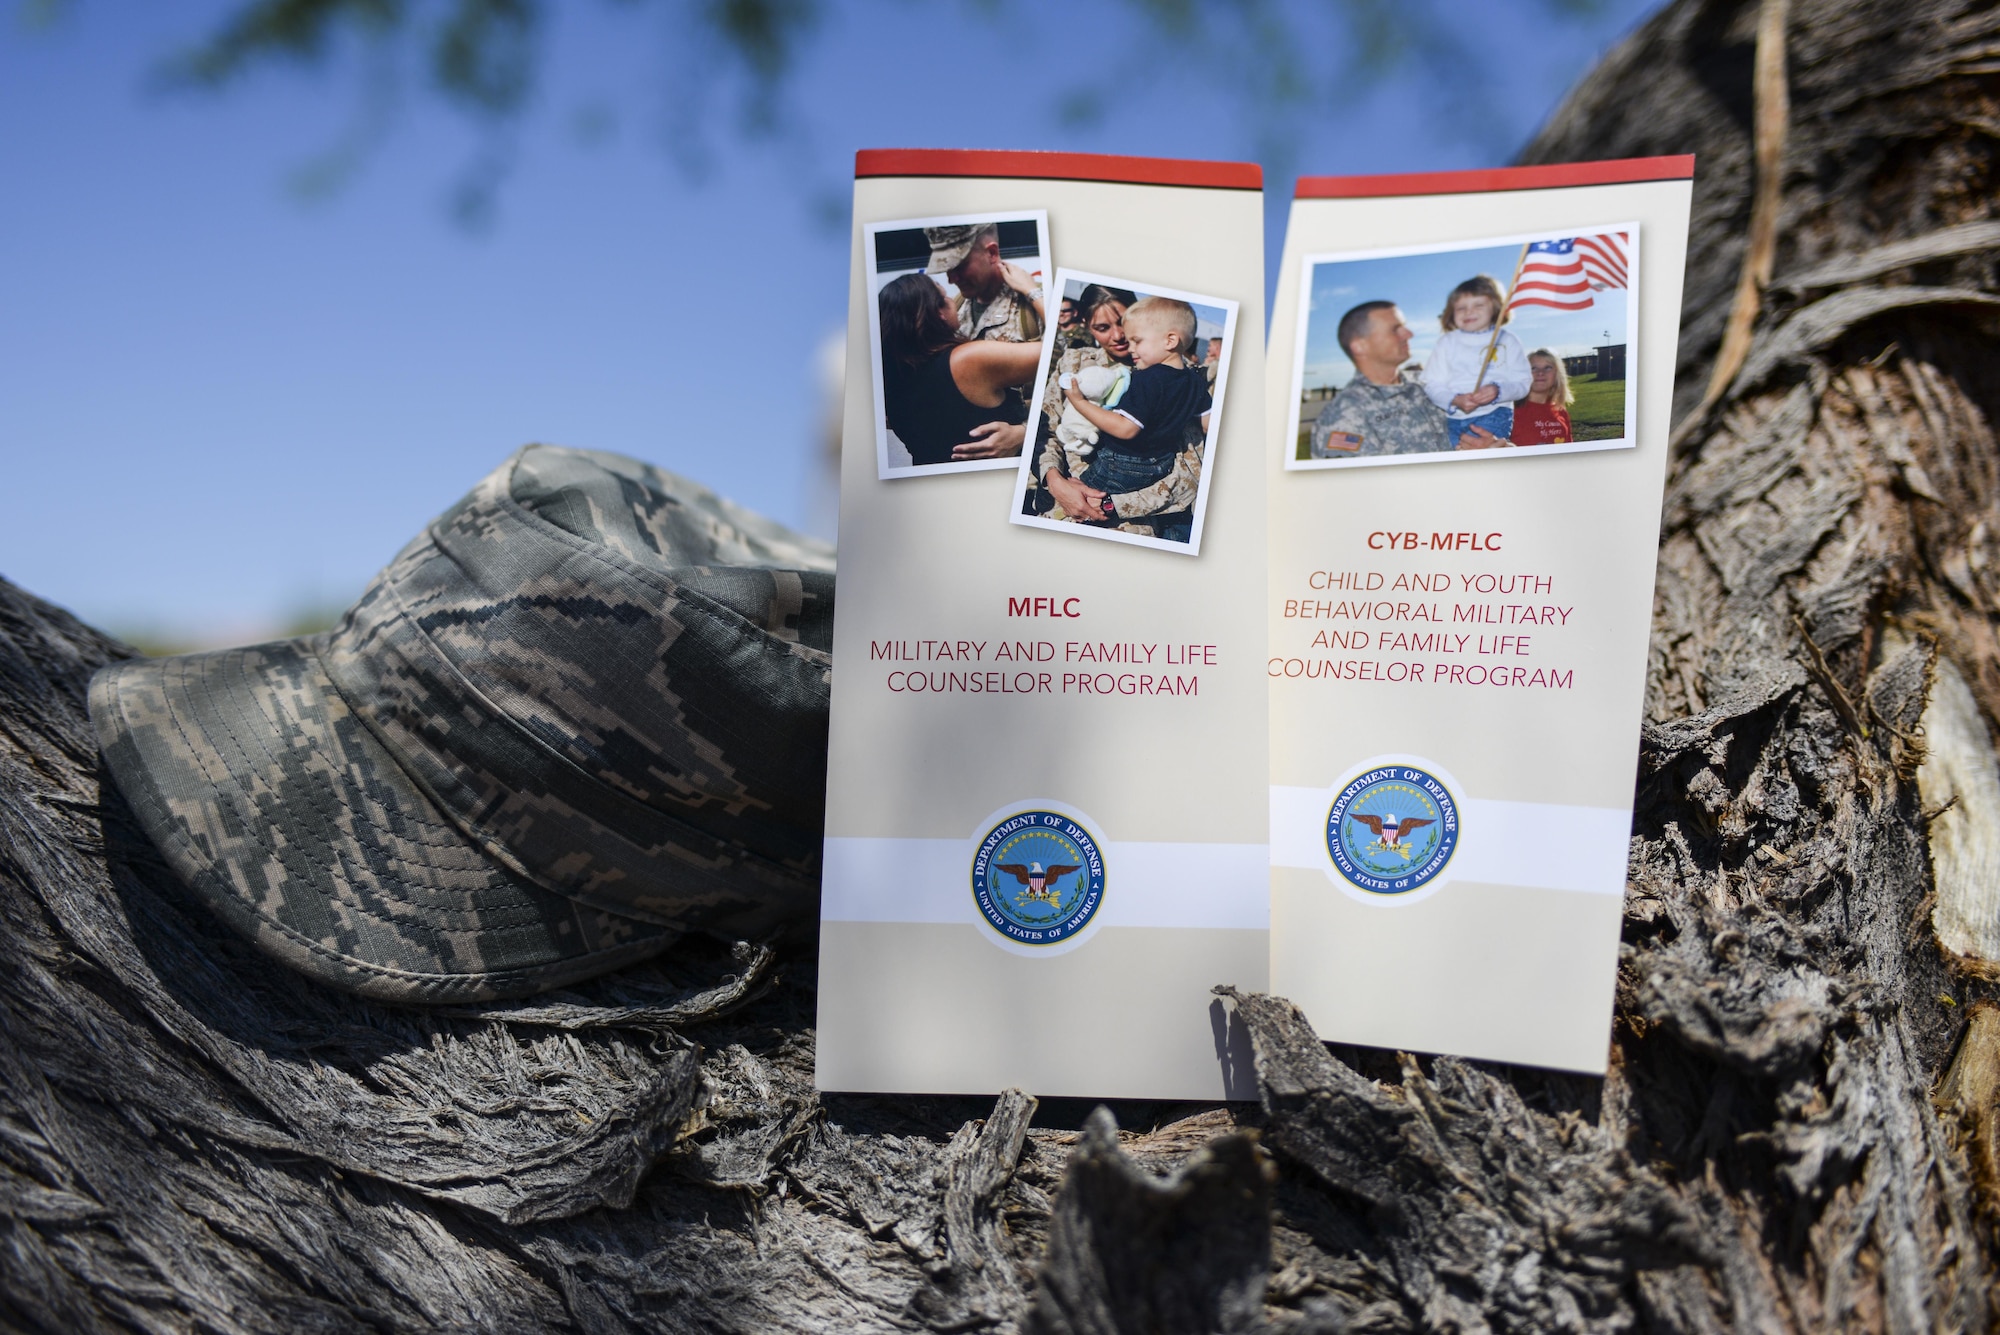 Brochures for the Military and Family Life Counselor Program rest on a tree at Nellis Air Force Base, Nev., June 1, 2016. The MFLC program offers short-term, non-medical counseling at no cost to active-duty service members, National Guard and reserve service members (regardless of activation status) and their families, as well as Department of Defense civilian expeditionary workforce members and their families. (U.S. Air Force photo illustration by Airman 1st Class Nathan Byrnes)